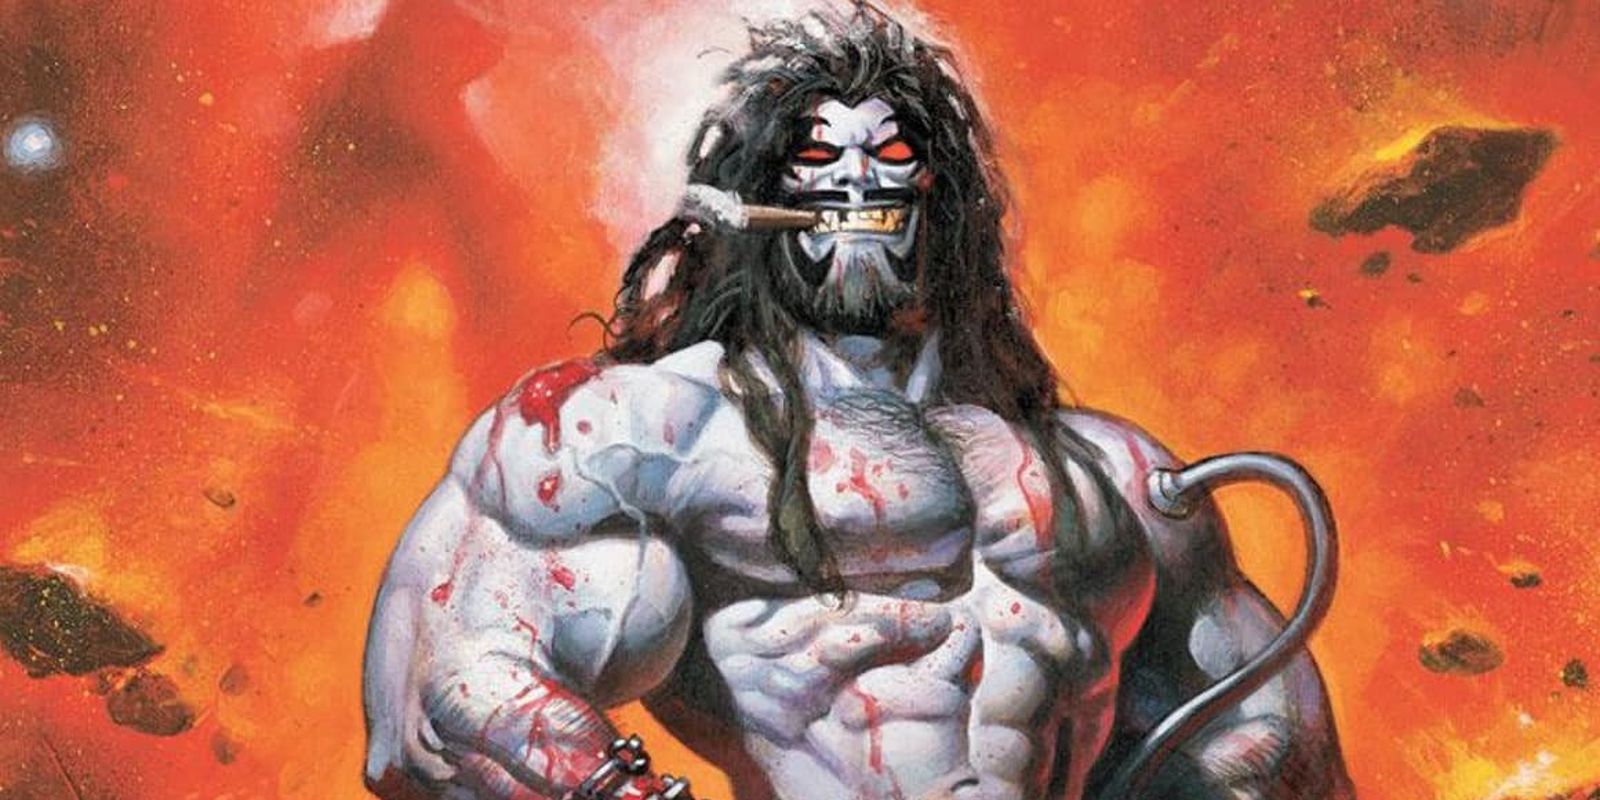 Lobo standing proudly with a smile in DC comics